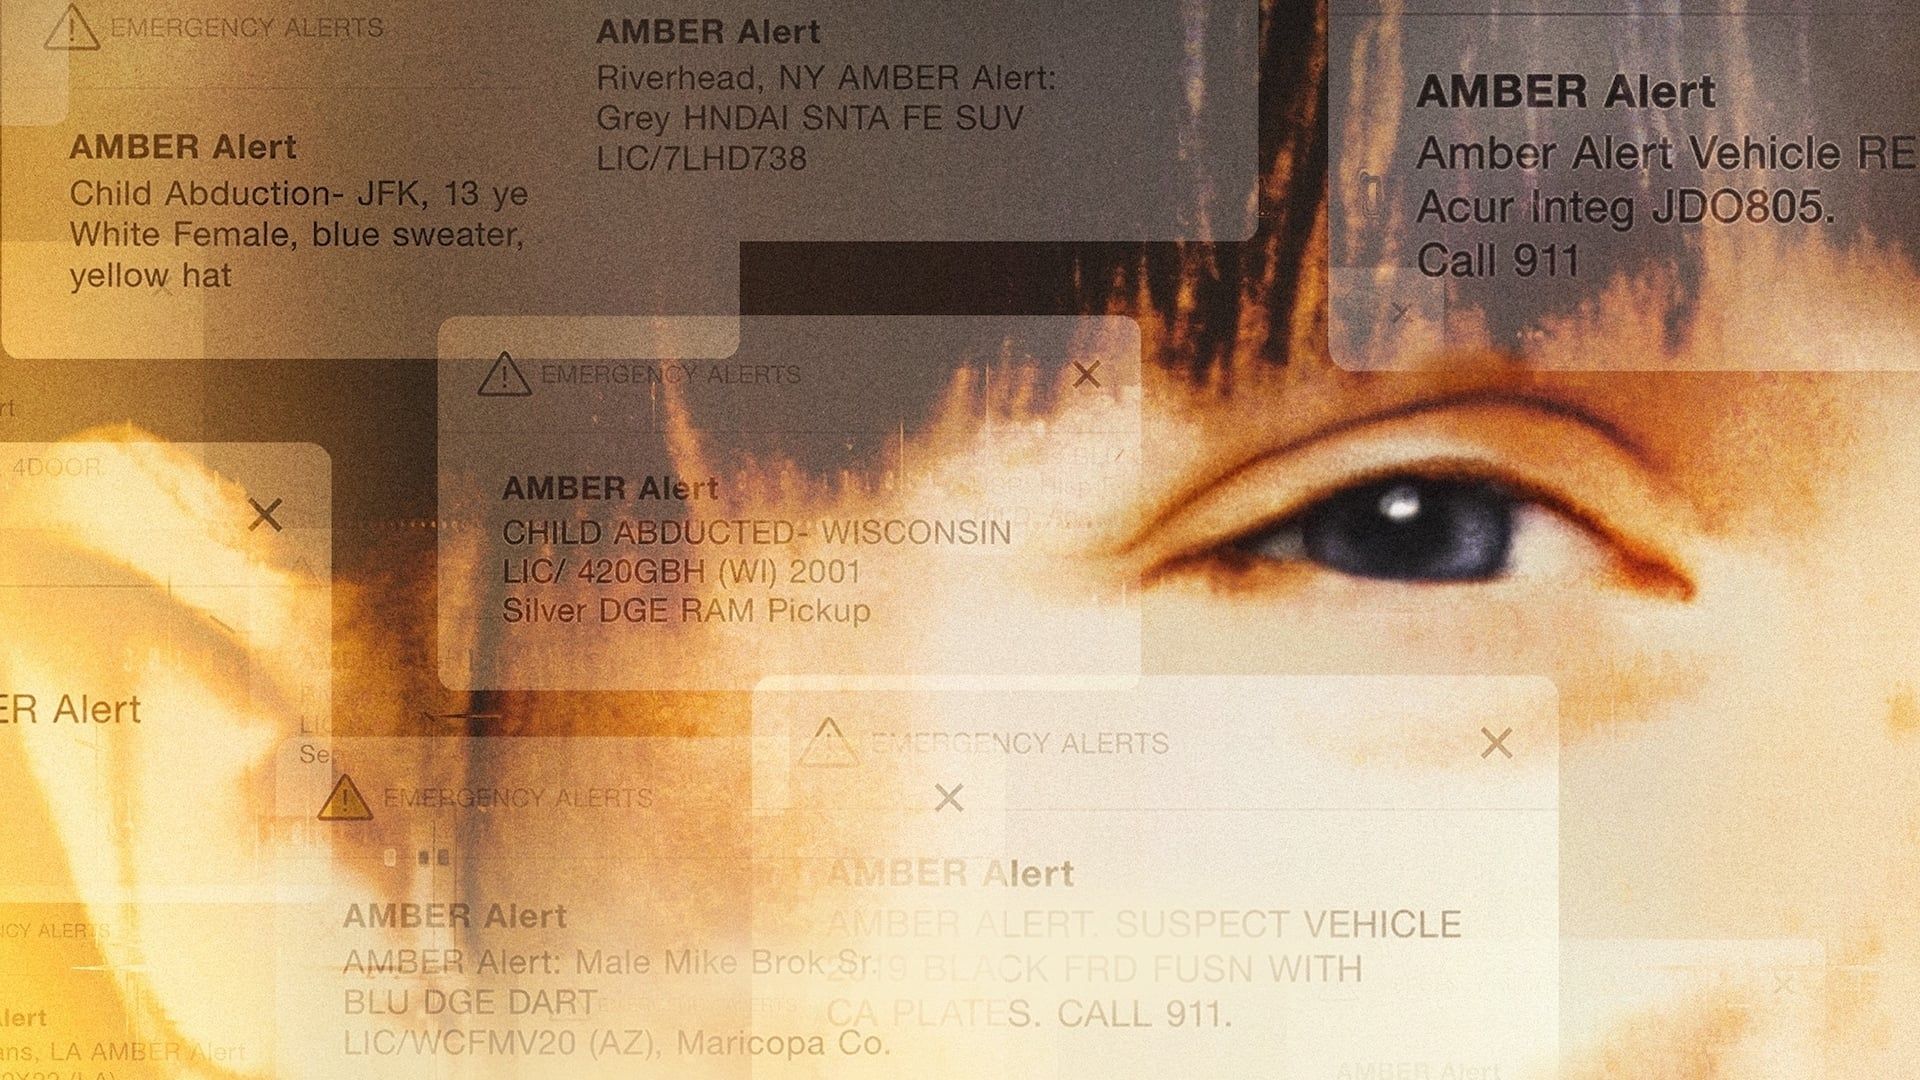 Amber: The Girl Behind the Alert background